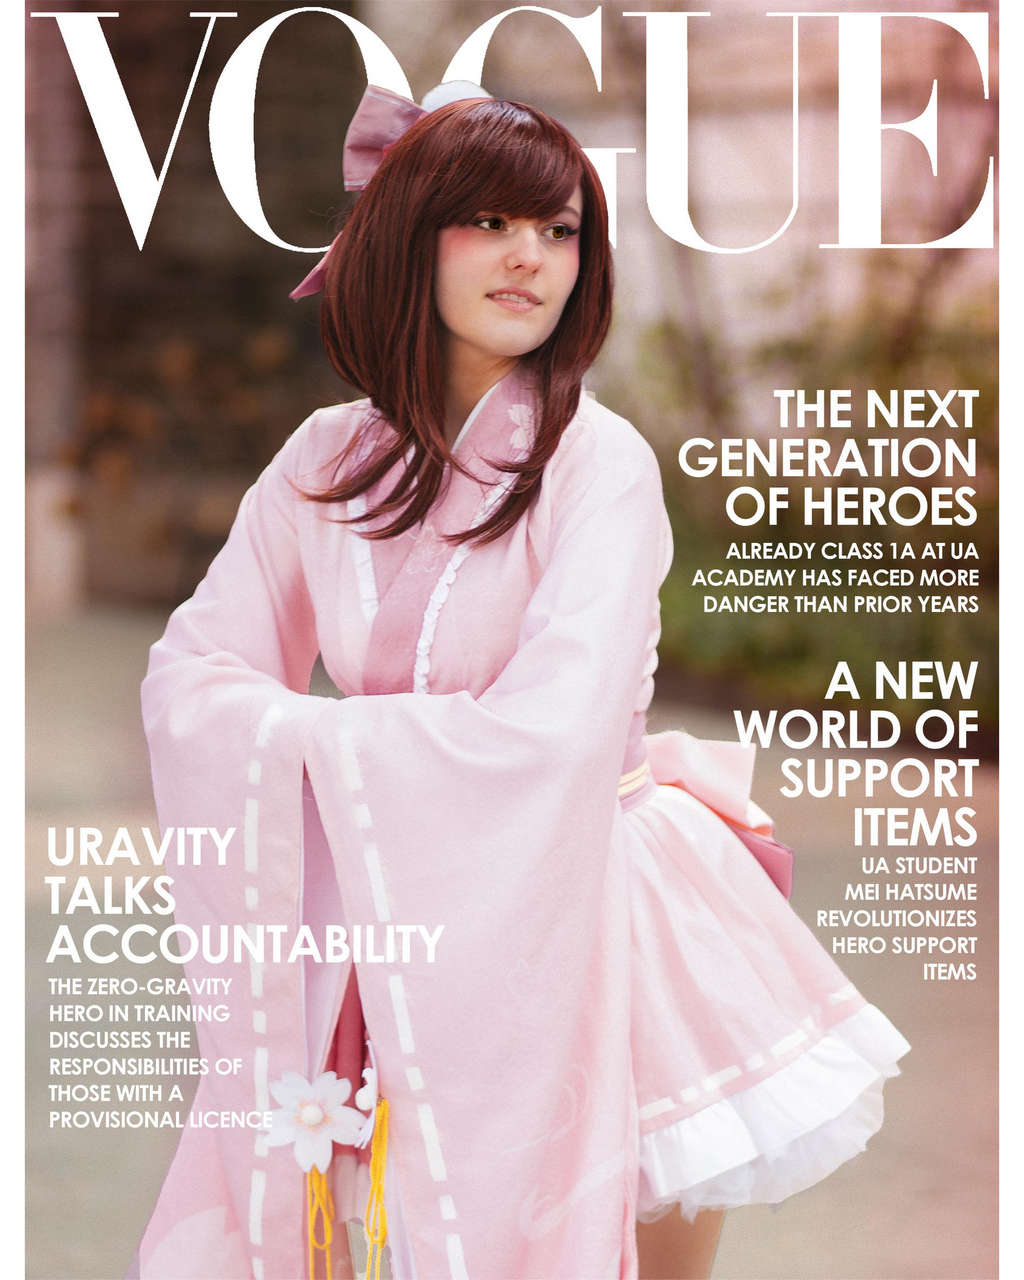 I Put My Ochaco Cosplay On The Cover Of Vogue Magazin